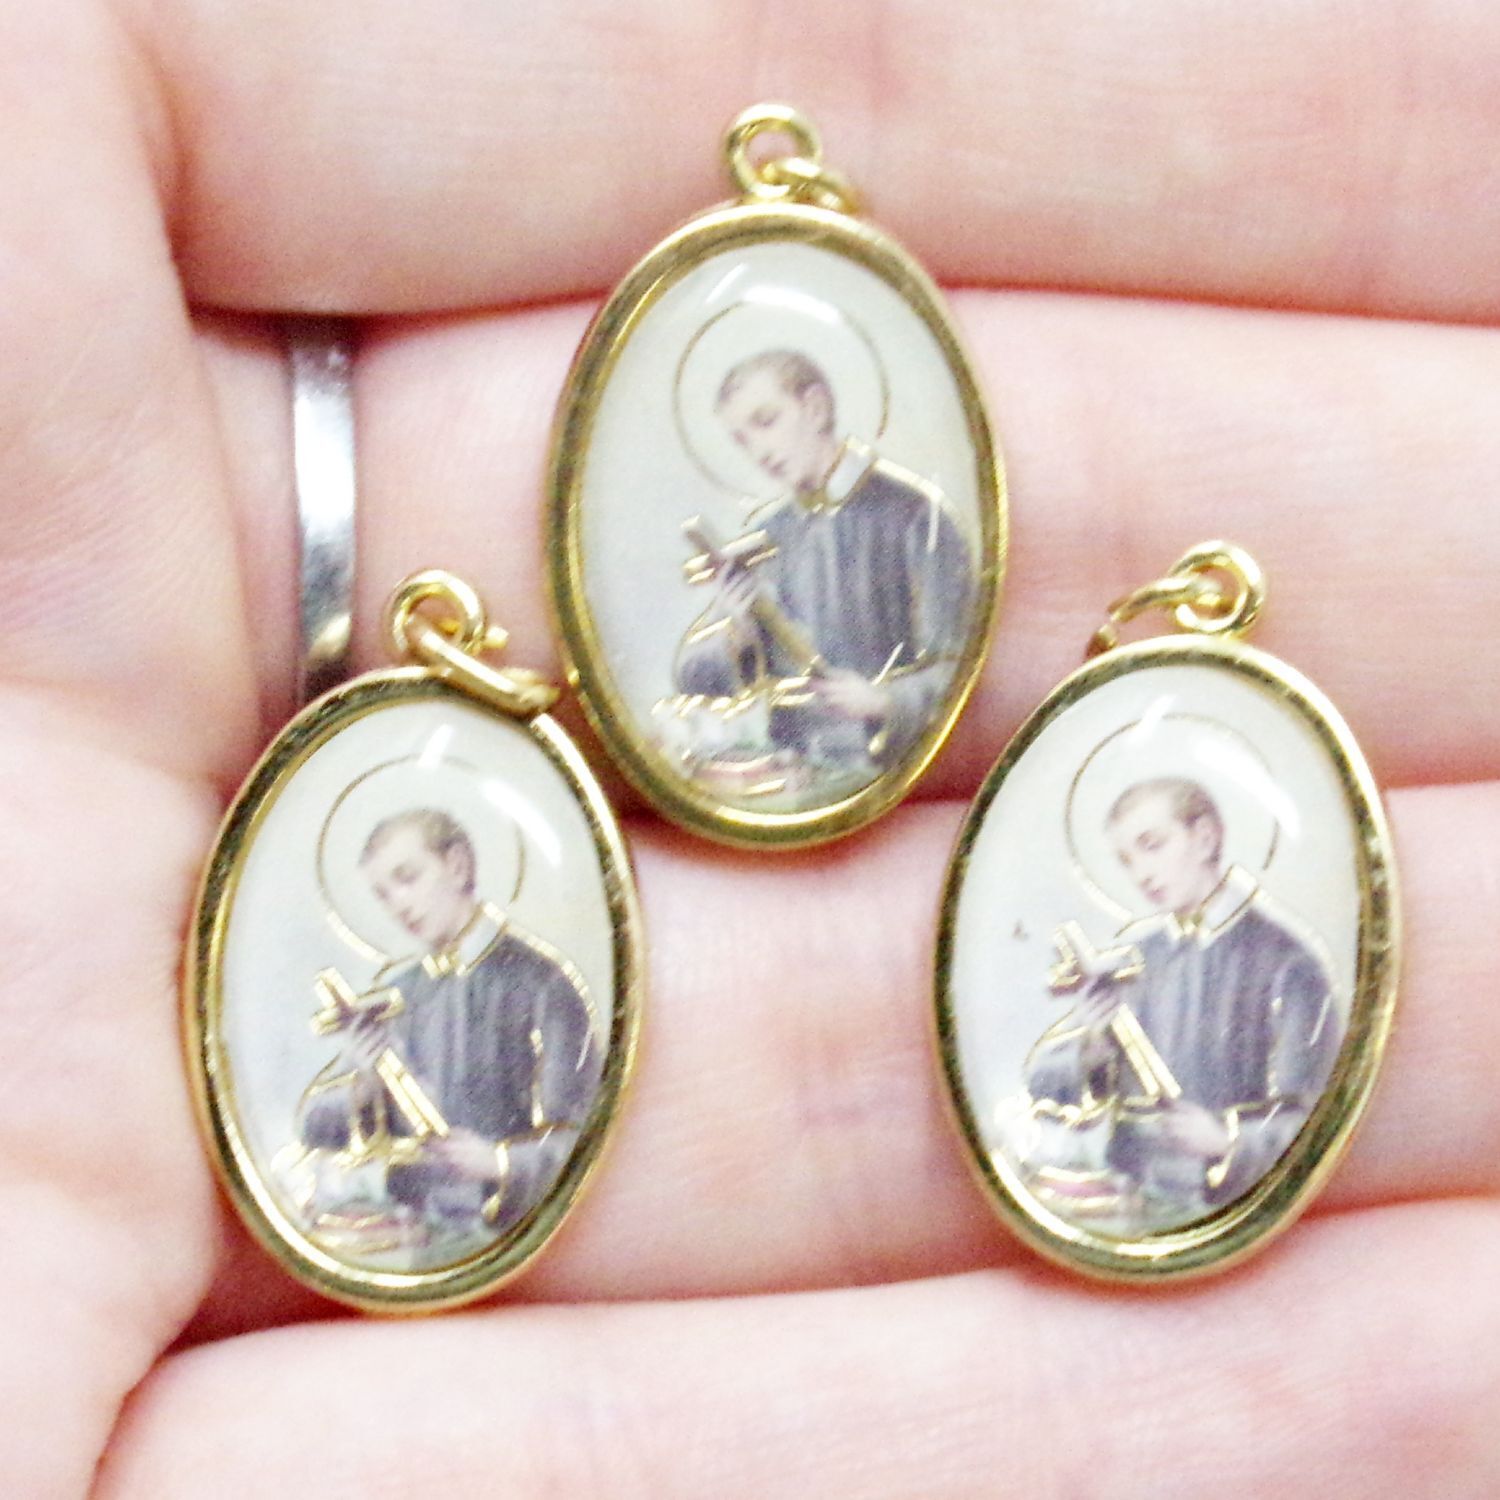 St Saint Gerard Epoxy Gold Tone Prayer Medals for Rosary Part 1 In 3 Pk